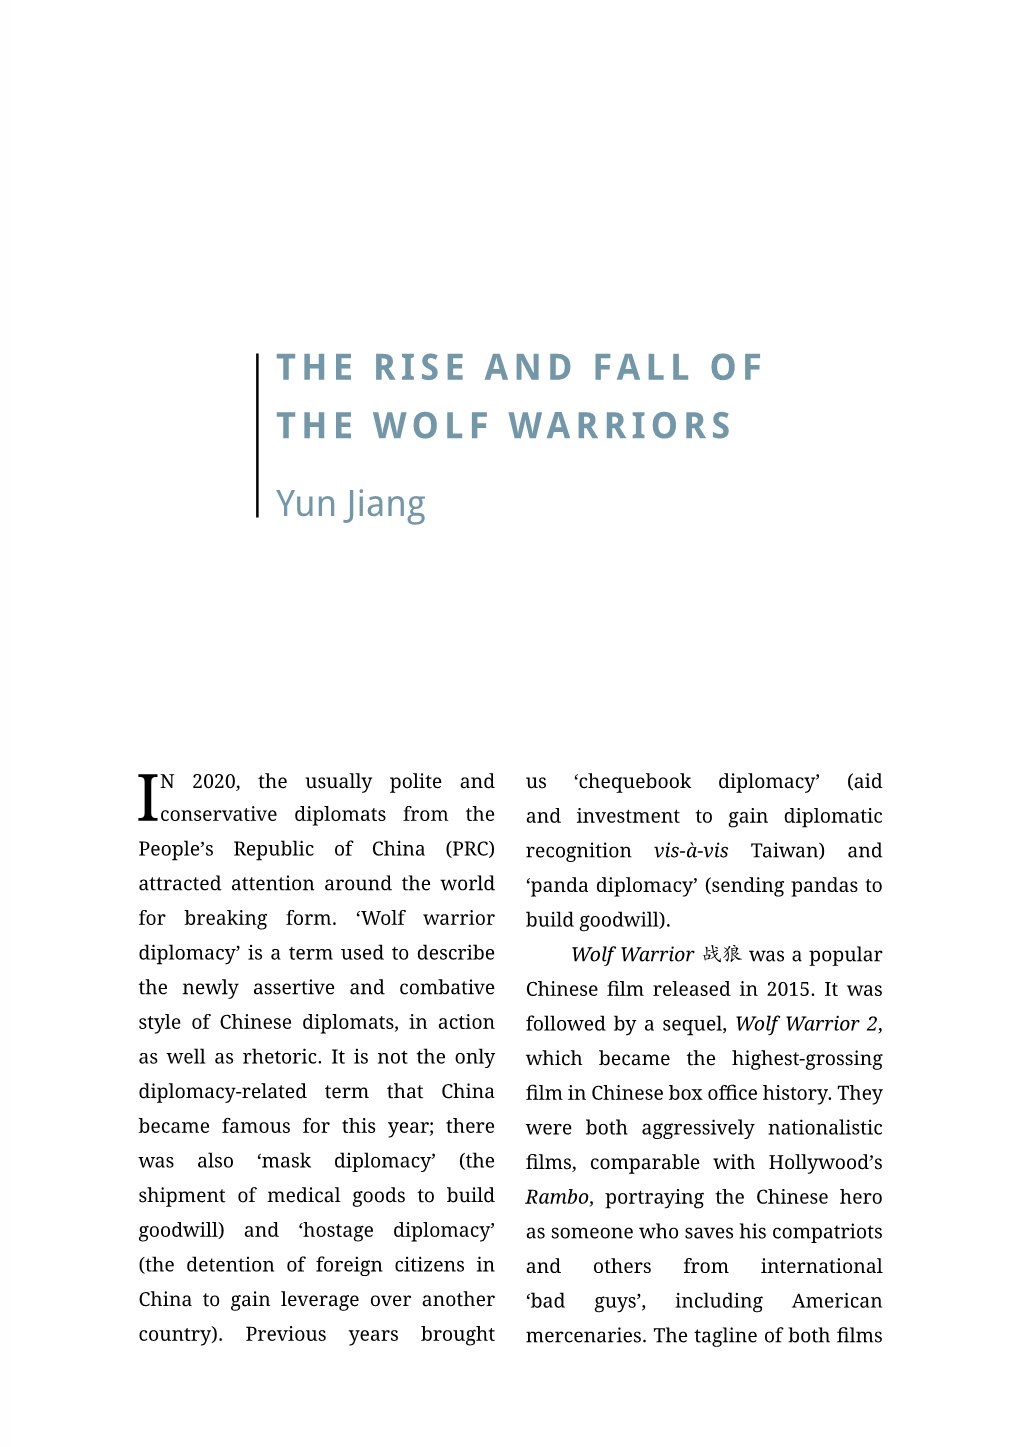 The Rise and Fall of the Wolf Warriors